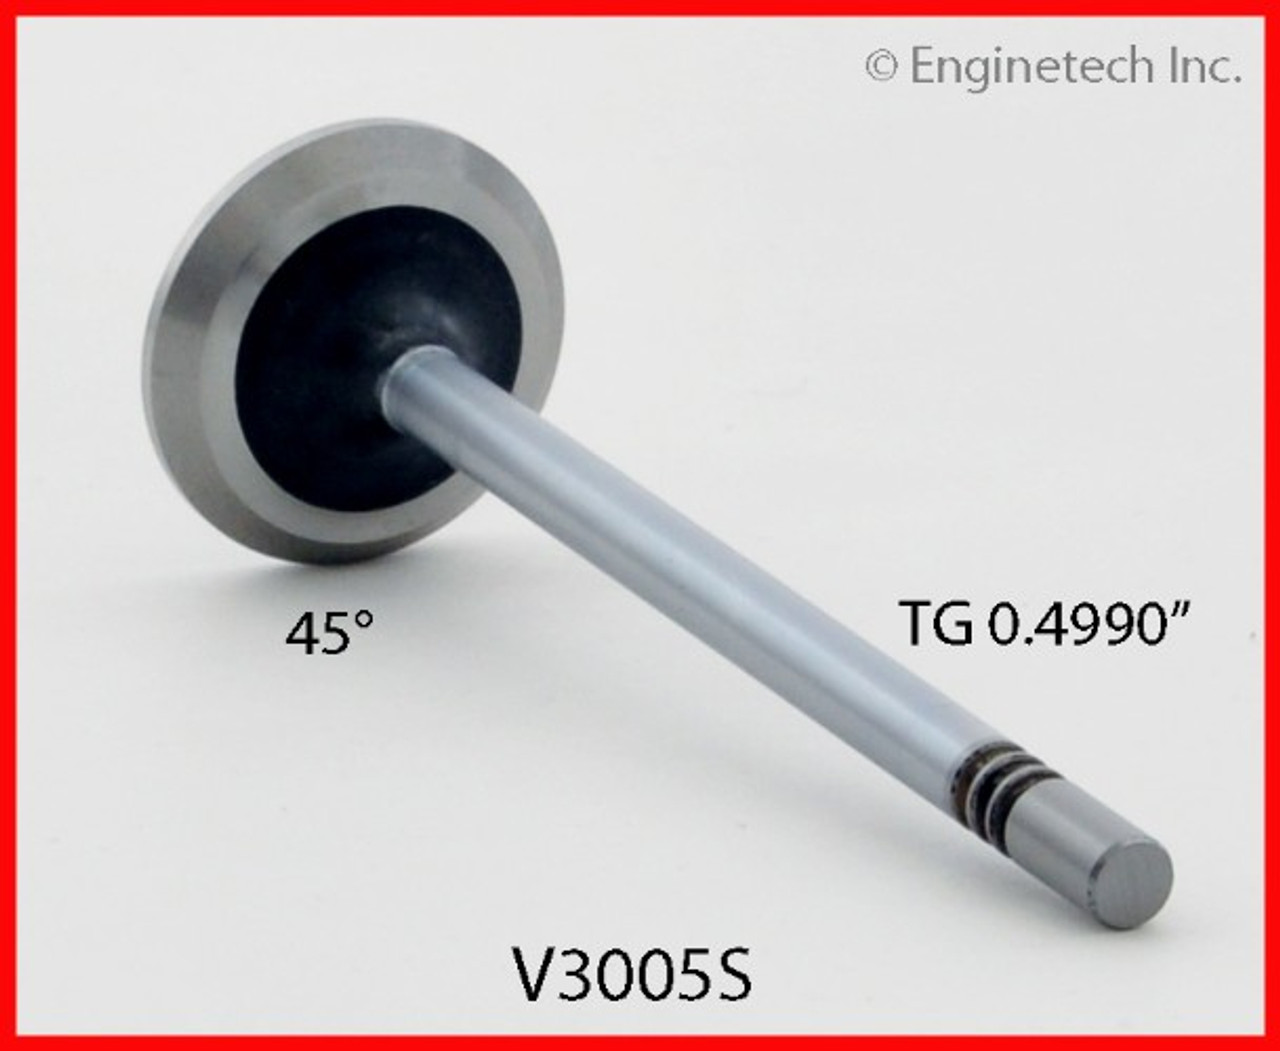 Exhaust Valve - 2000 Ford F-450 Super Duty 6.8L (V3005S.D33)